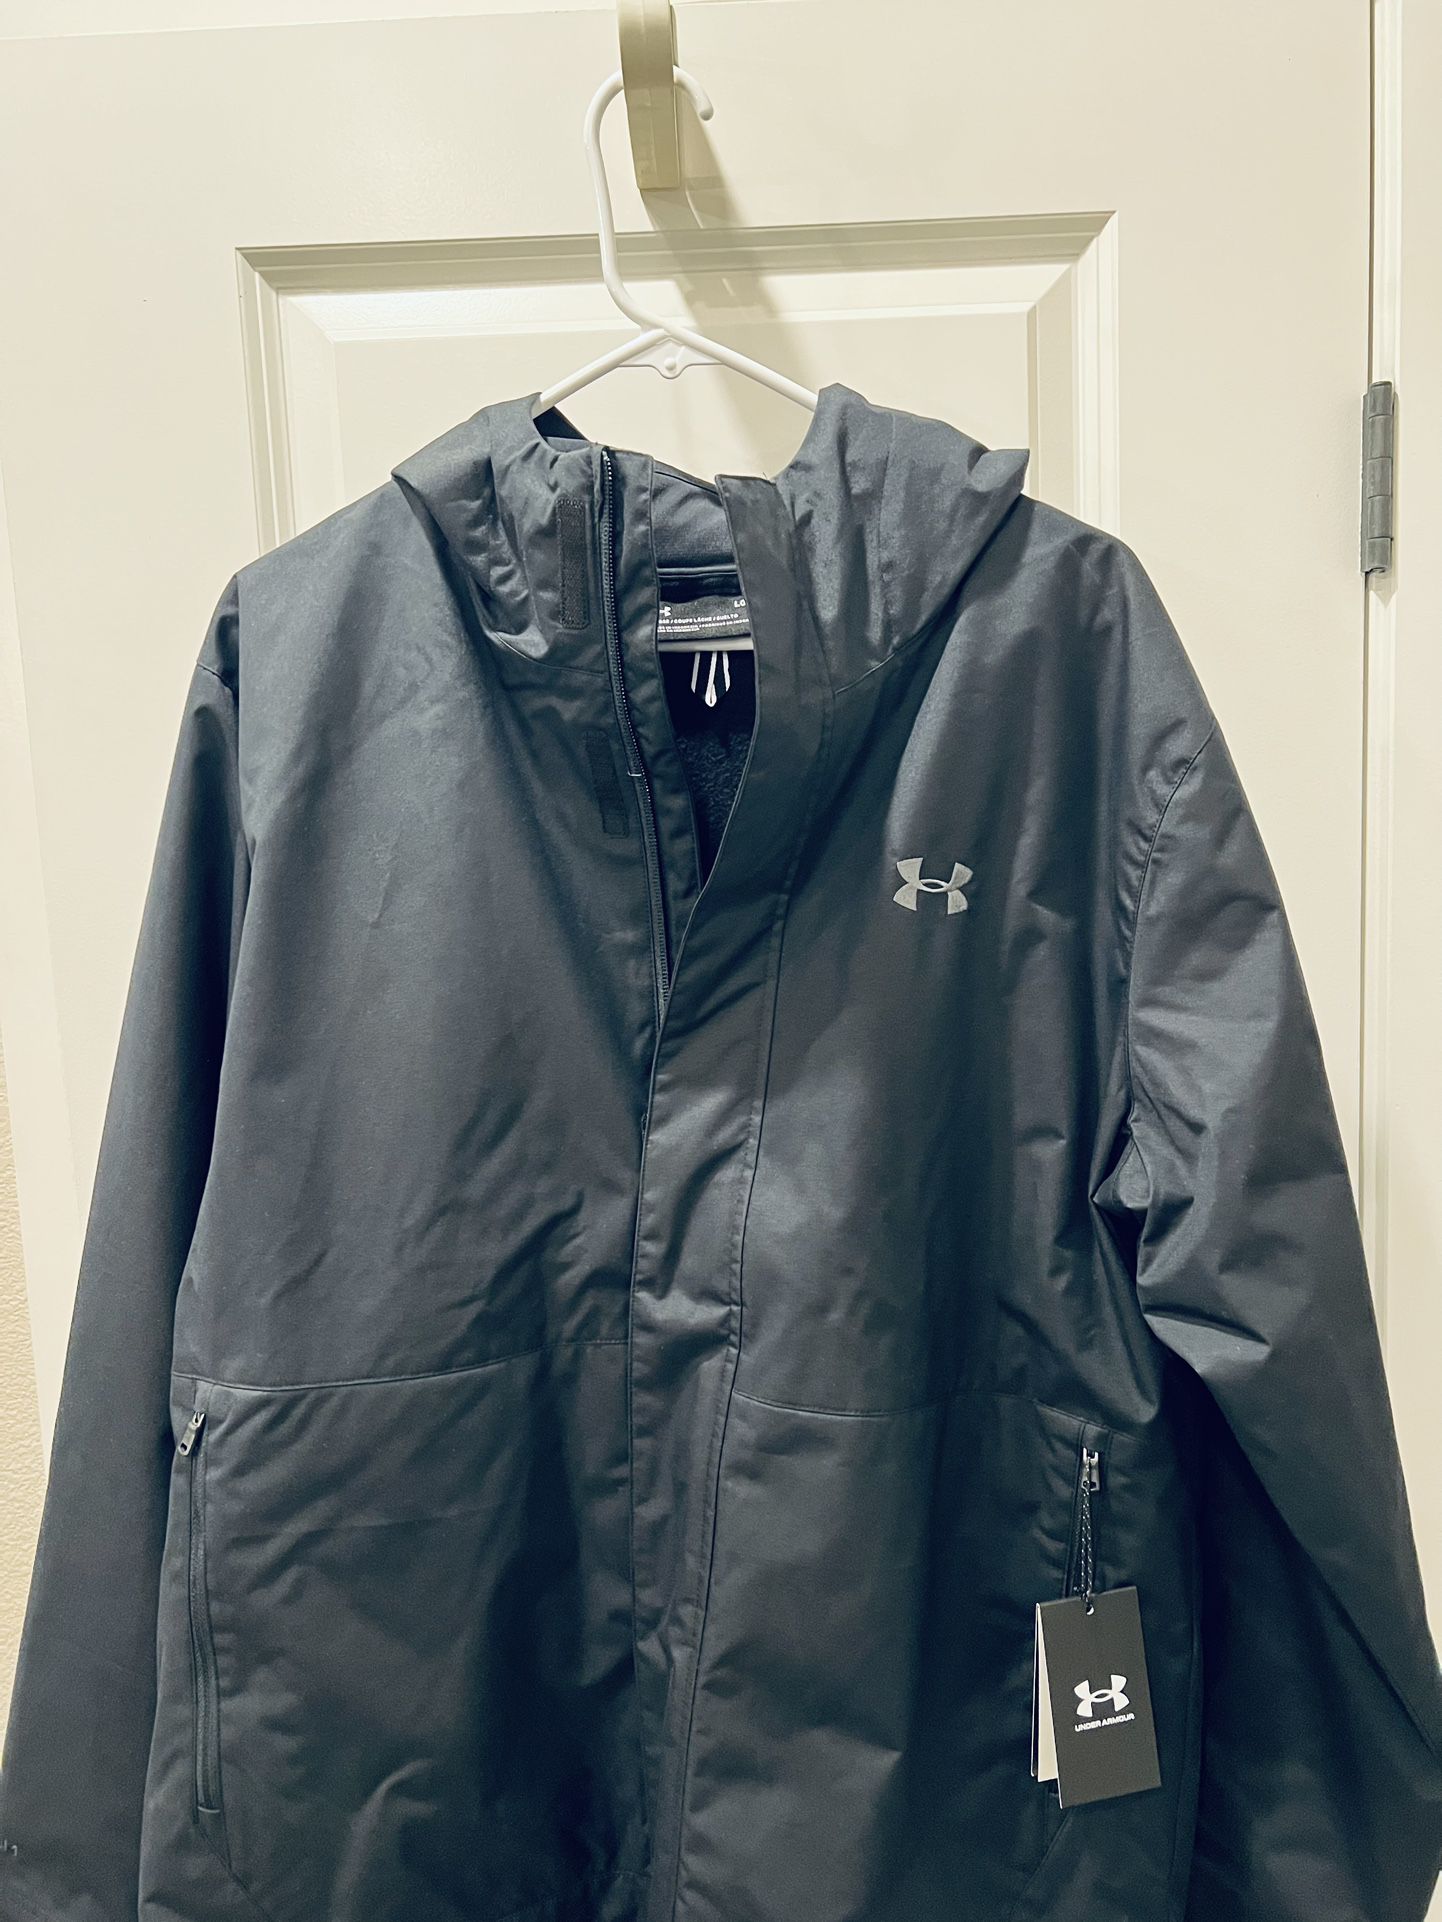 Under Armour Hoodie Zip Jacket For Mens Size L